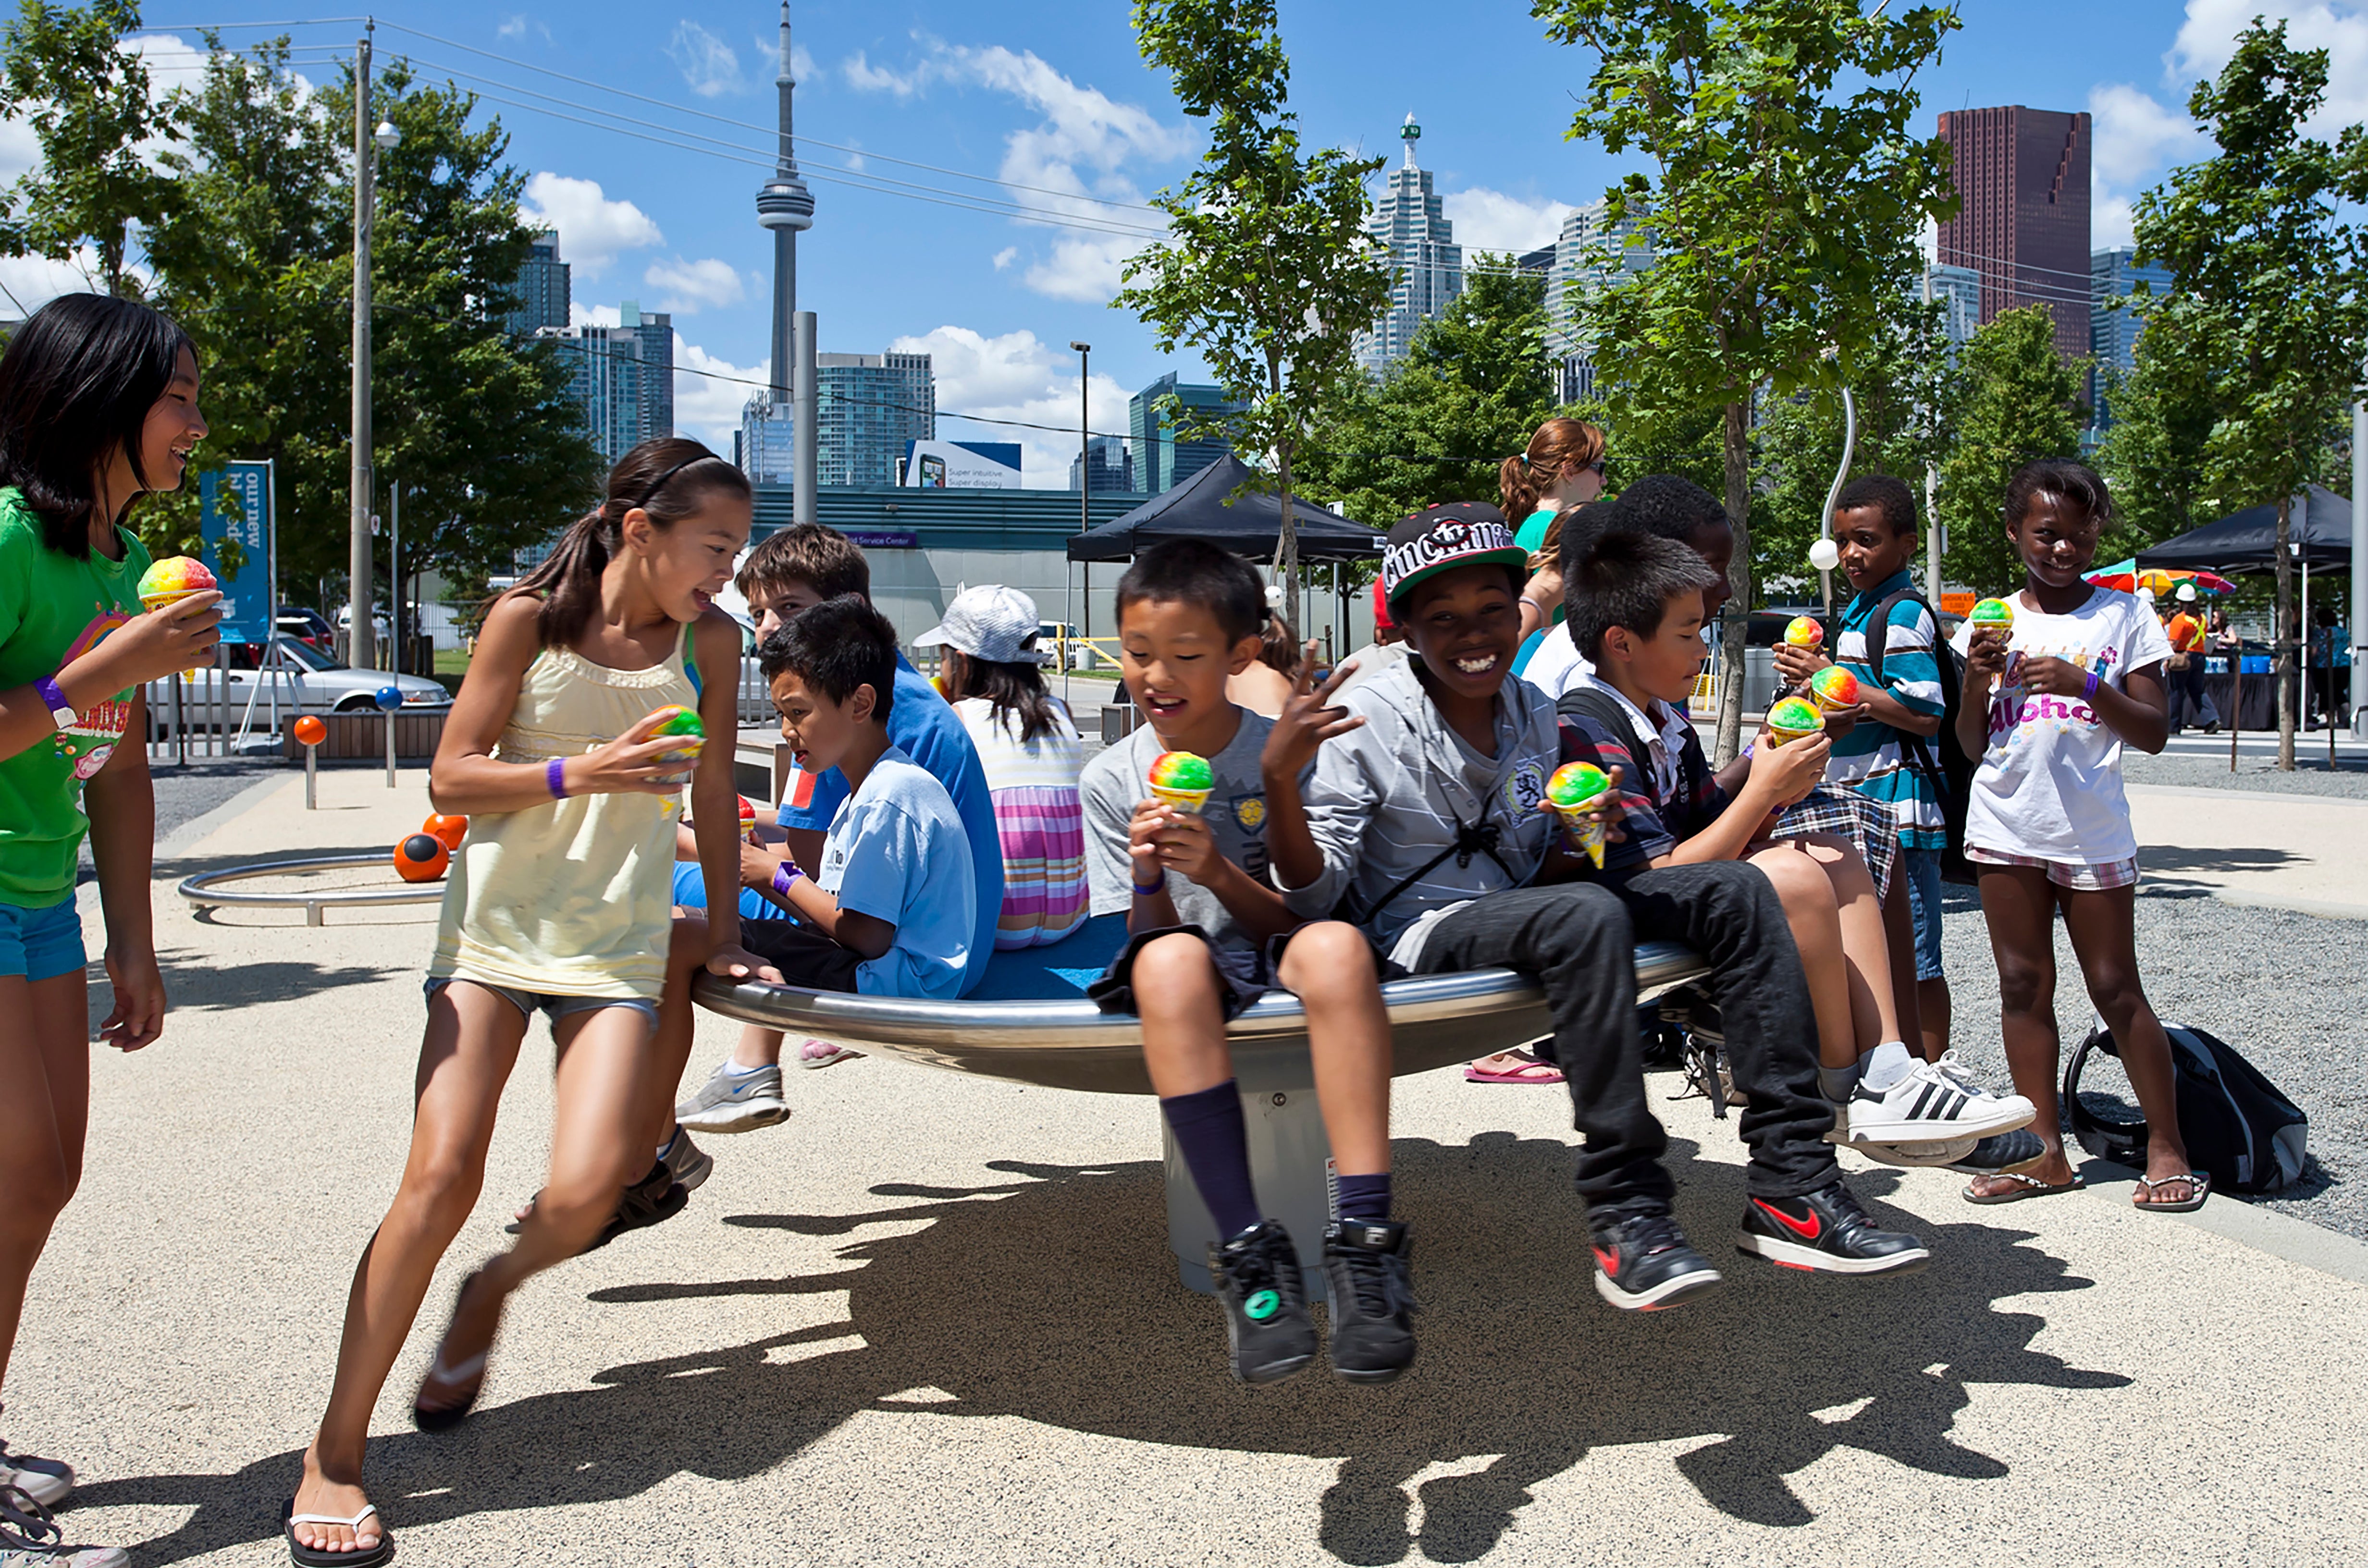 Children playing on the spinning equipment at Sherbourne Common.